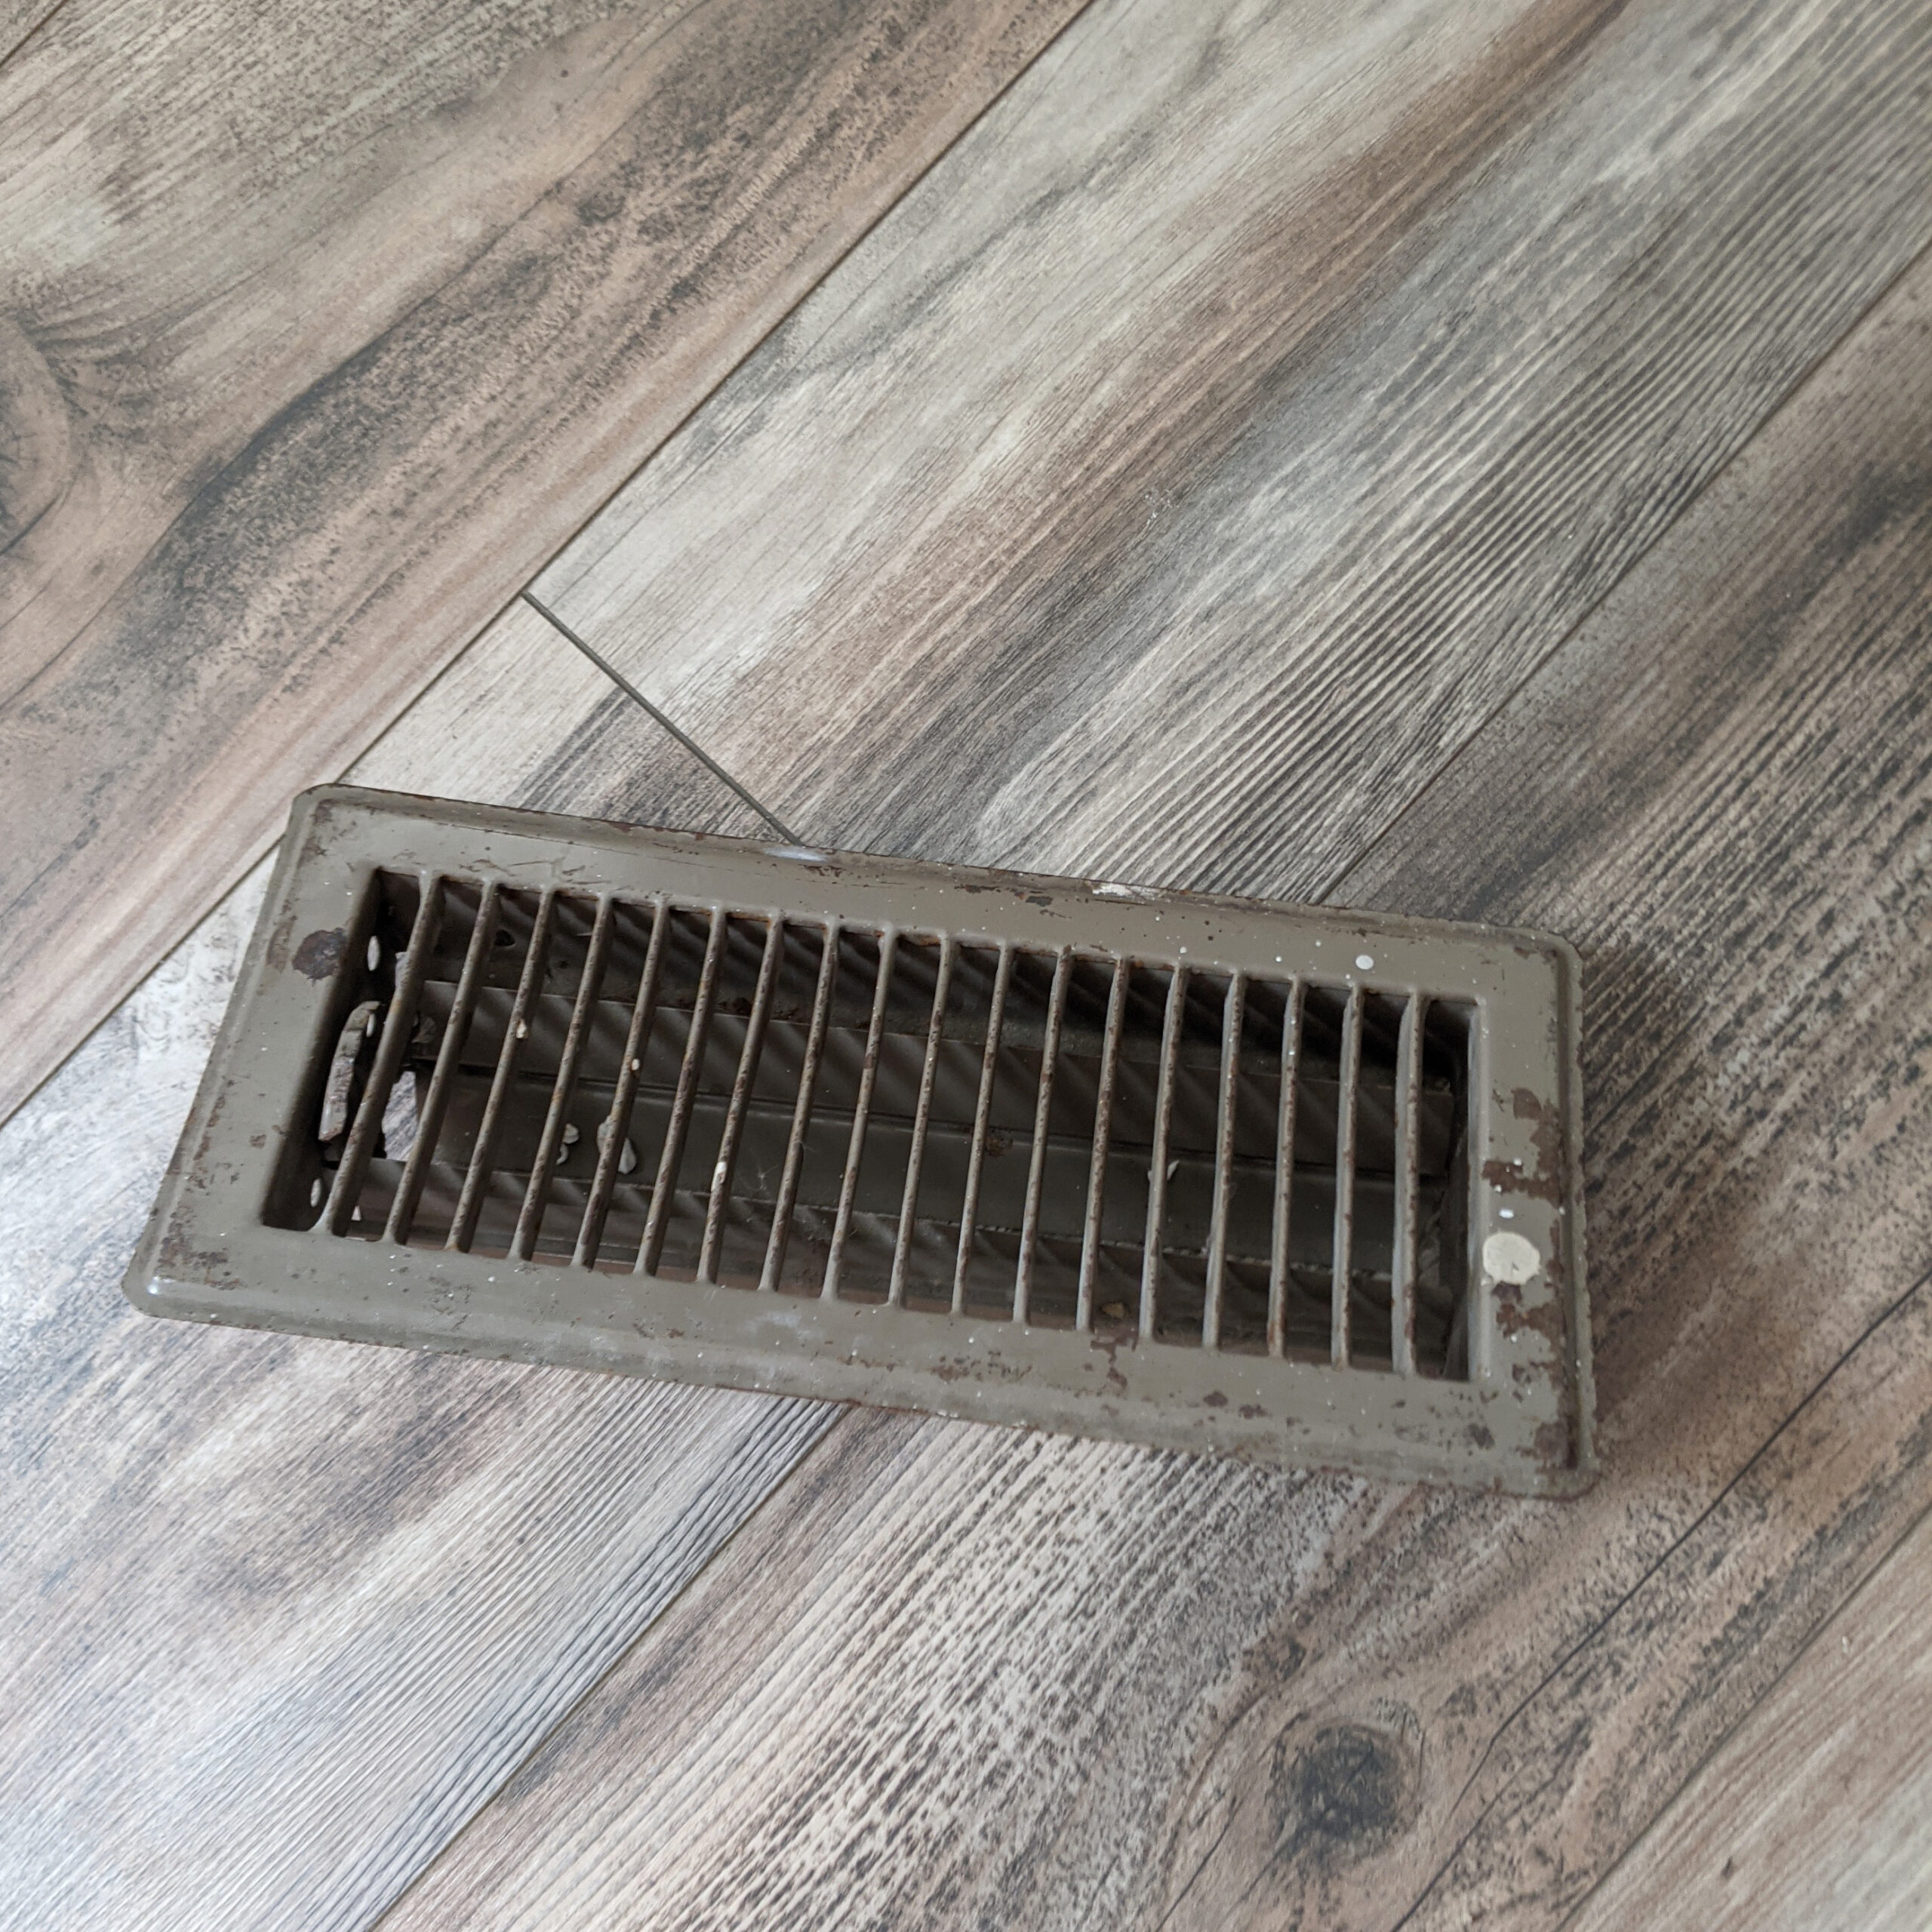 rusted heater vent grille in my home.